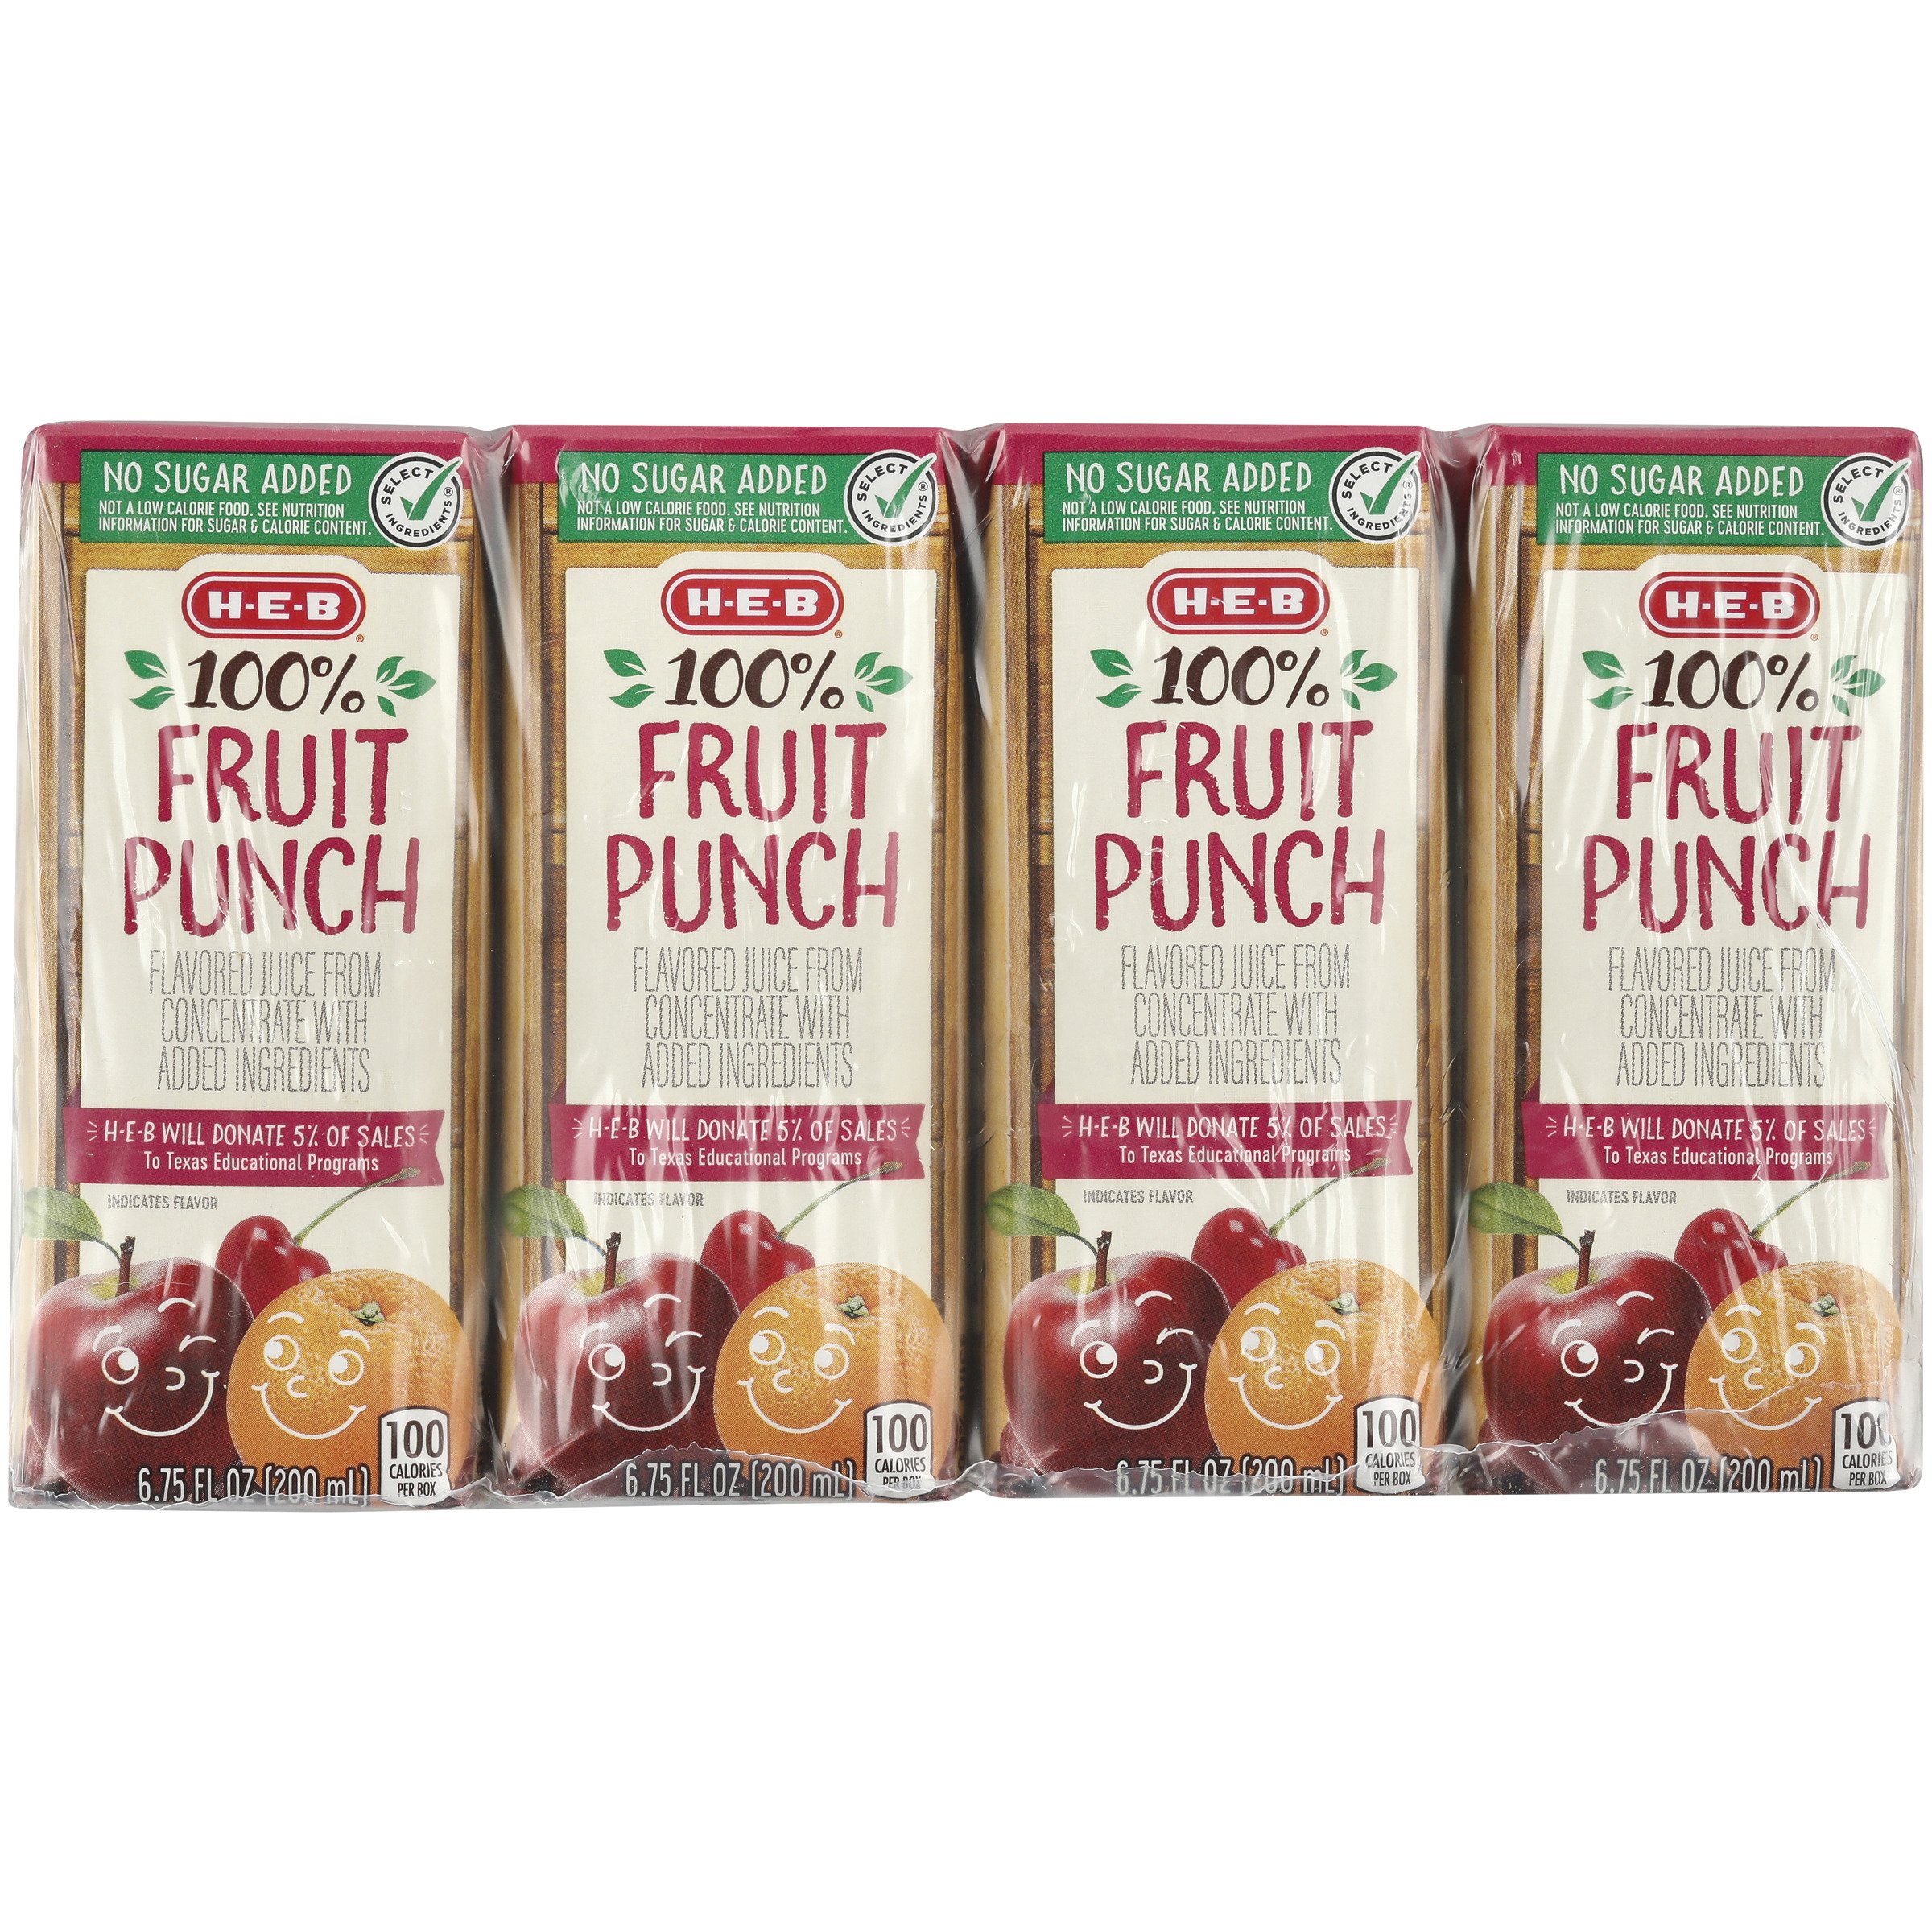 images of juice boxes